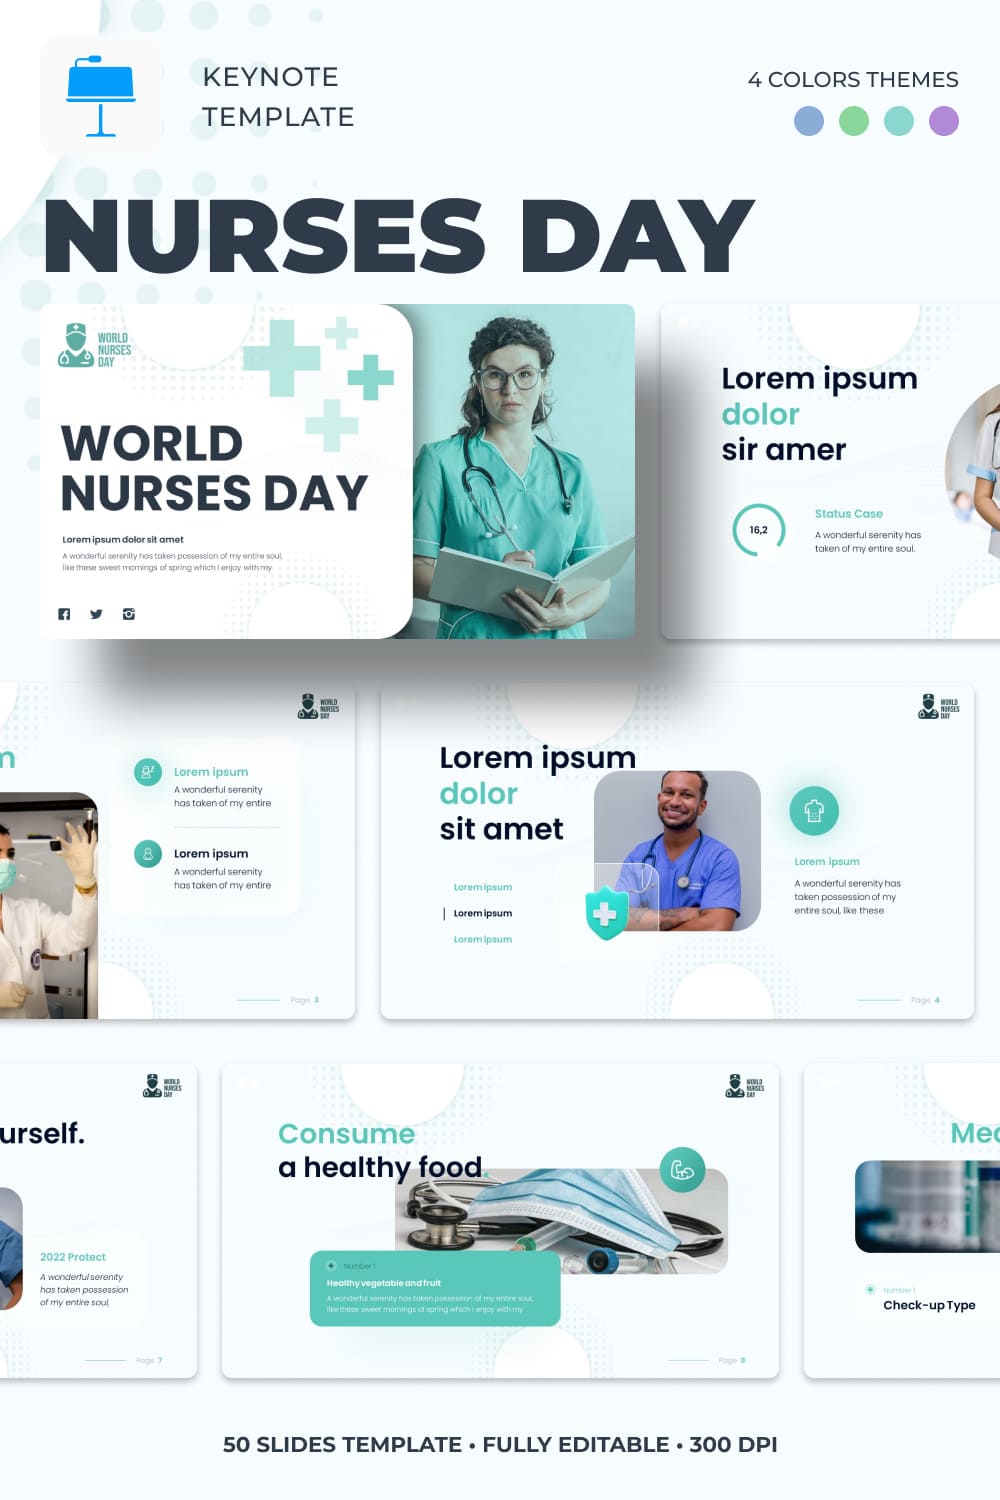 Nurses Day Keynote Template - pinterest image preview.